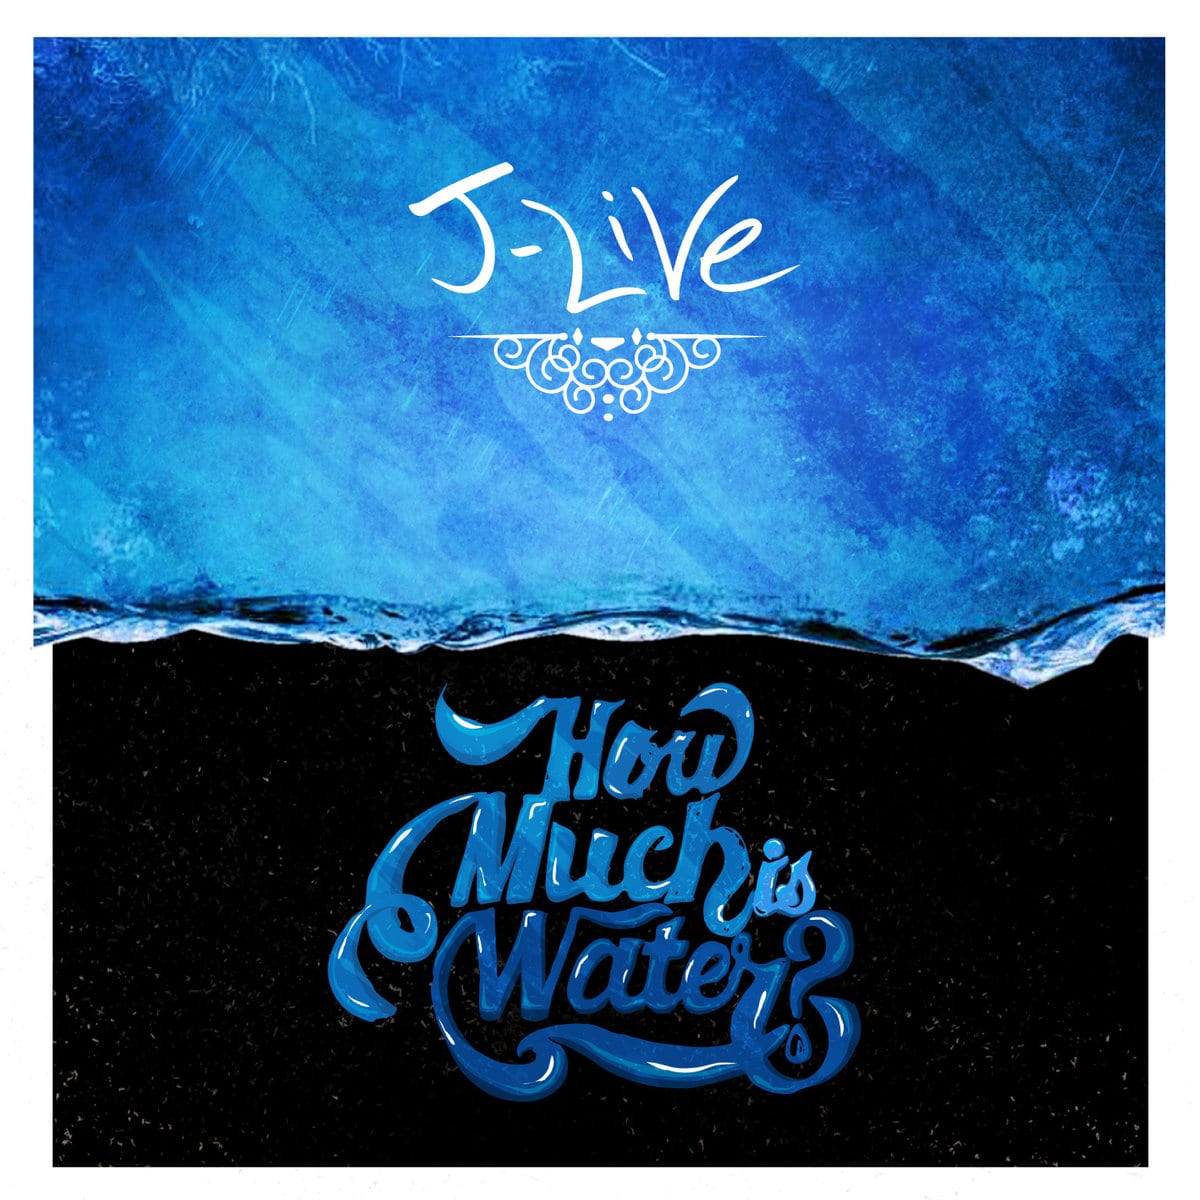 J-Live - "How Much Is Water?" (Album)